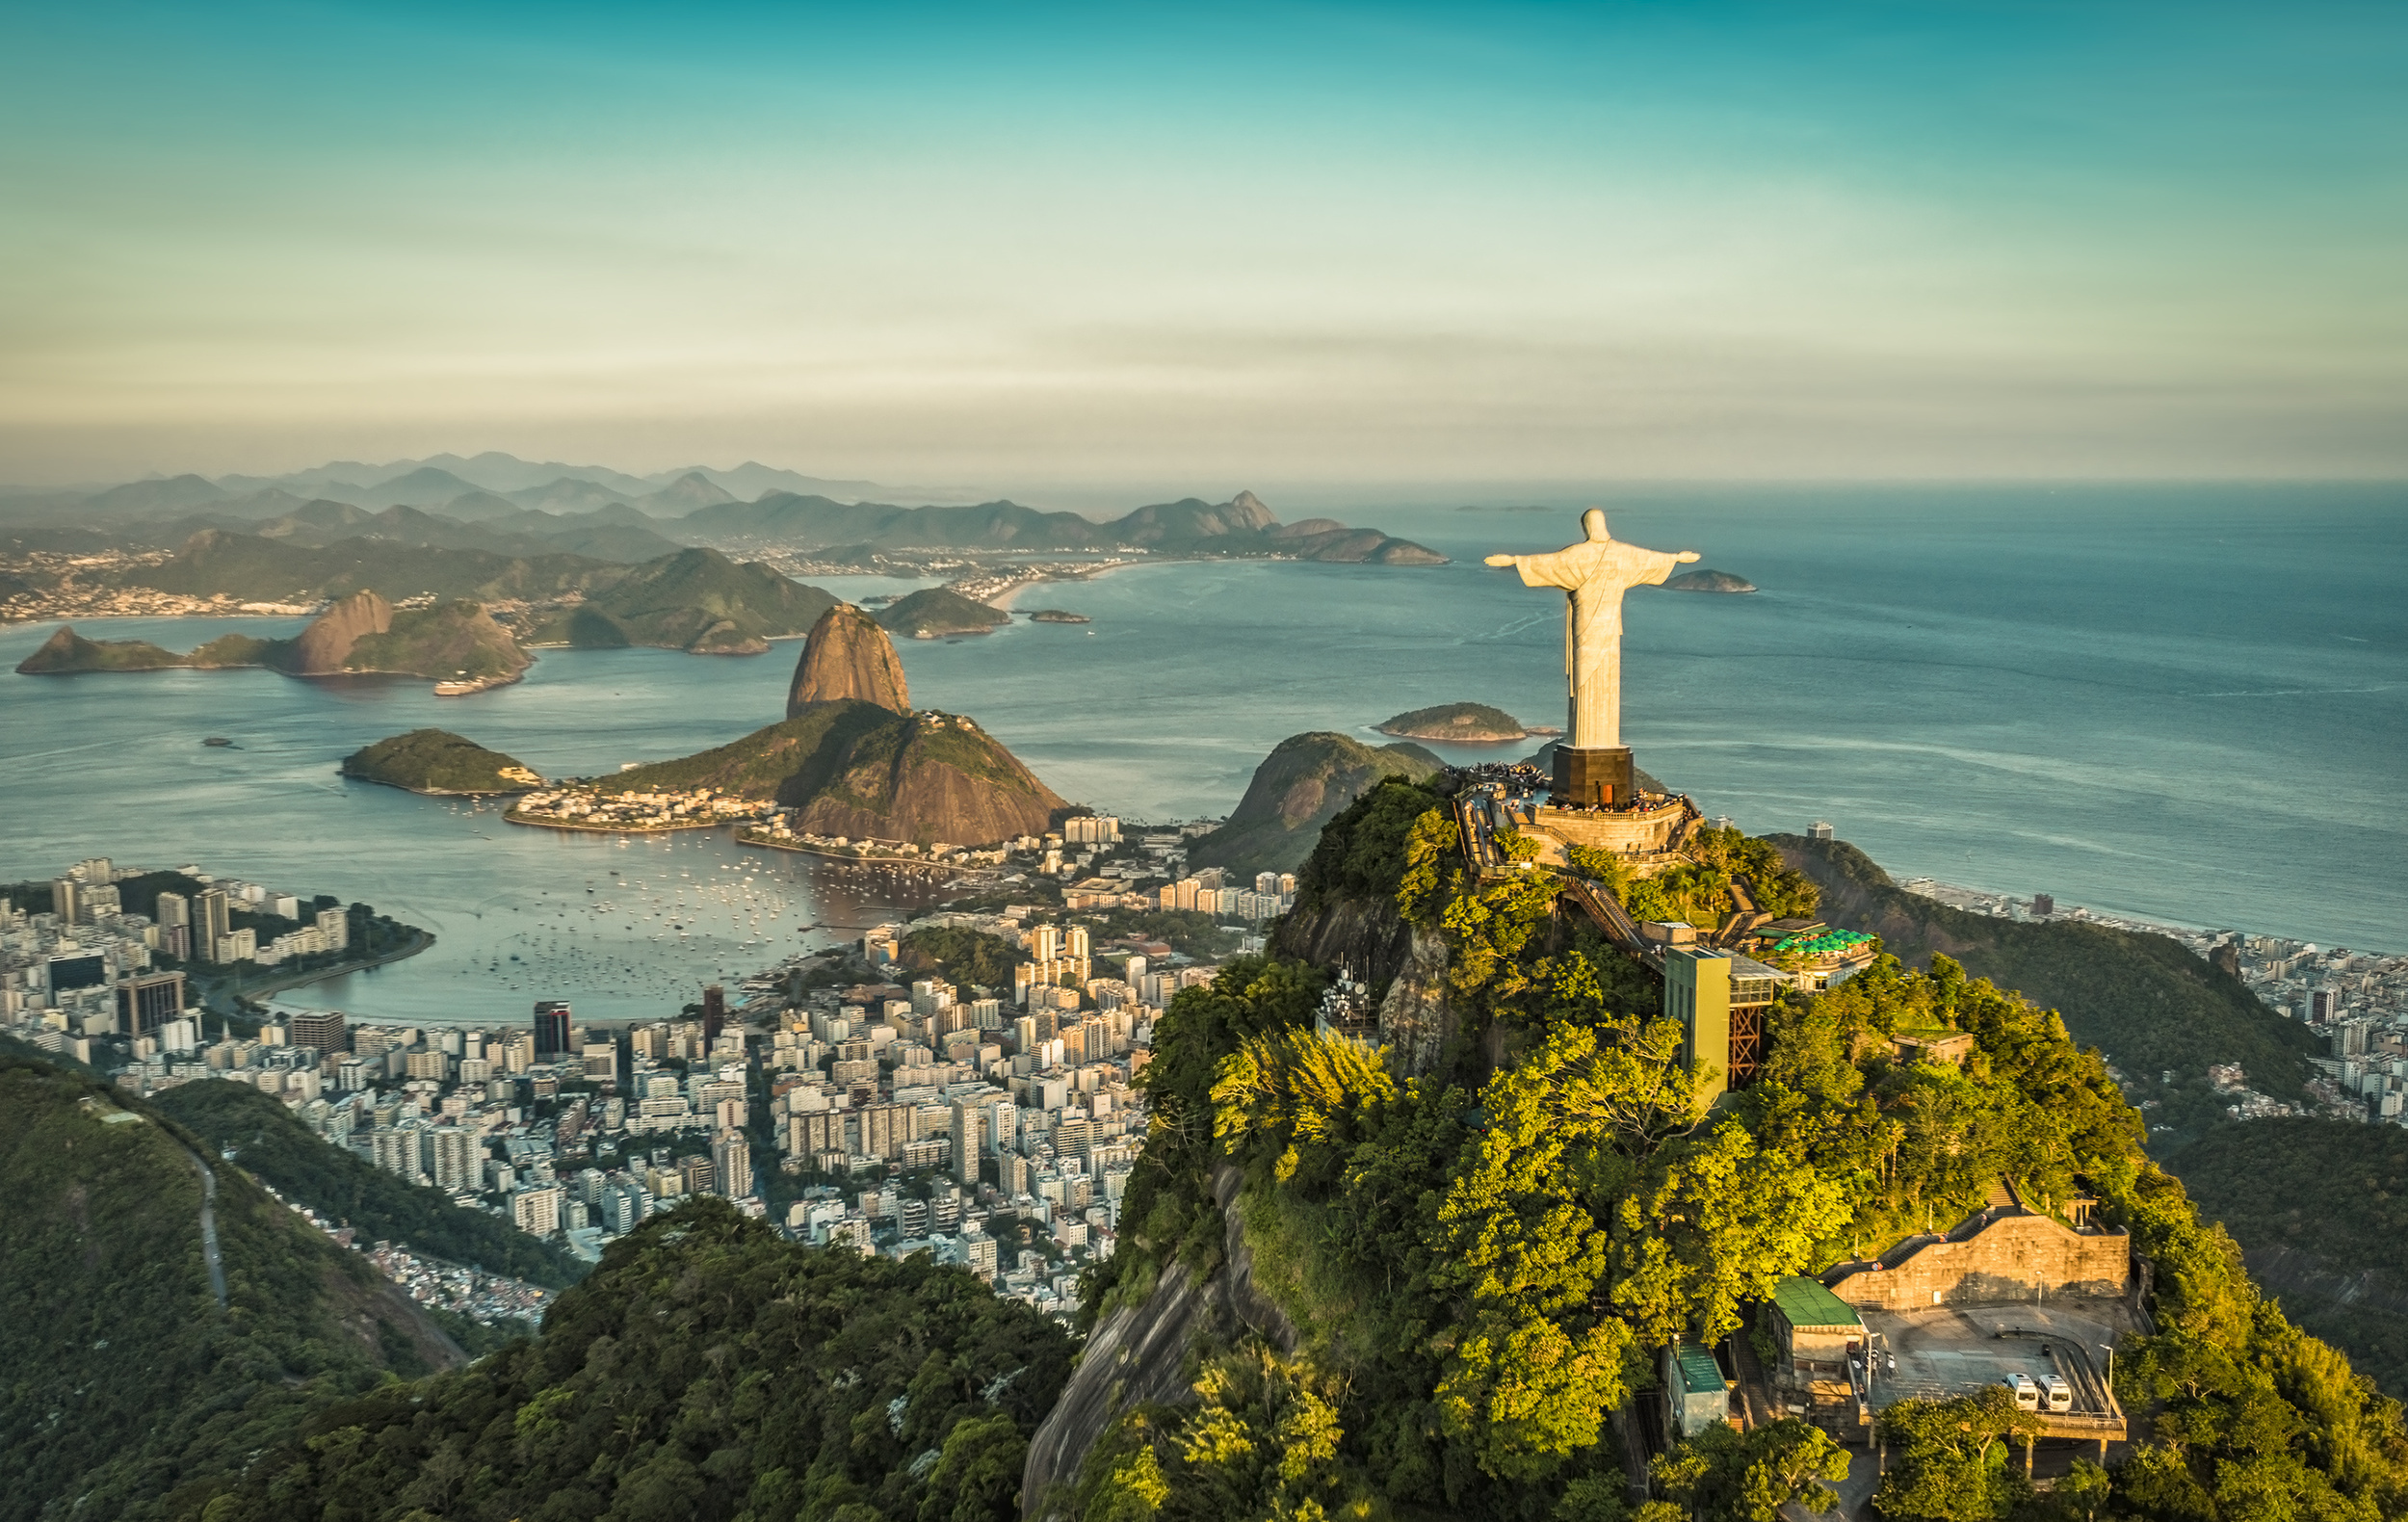 <p>Another South American favorite, Rio is always a good idea. It is particularly so during winter up north when the frigid weather makes you want to stay inside all day. That’s not the case in Brazil, where it’s always beach and outdoor party season! </p><p><a href='https://www.msn.com/en-us/community/channel/vid-cj9pqbr0vn9in2b6ddcd8sfgpfq6x6utp44fssrv6mc2gtybw0us'>Follow us on MSN to see more of our exclusive lifestyle content.</a></p>